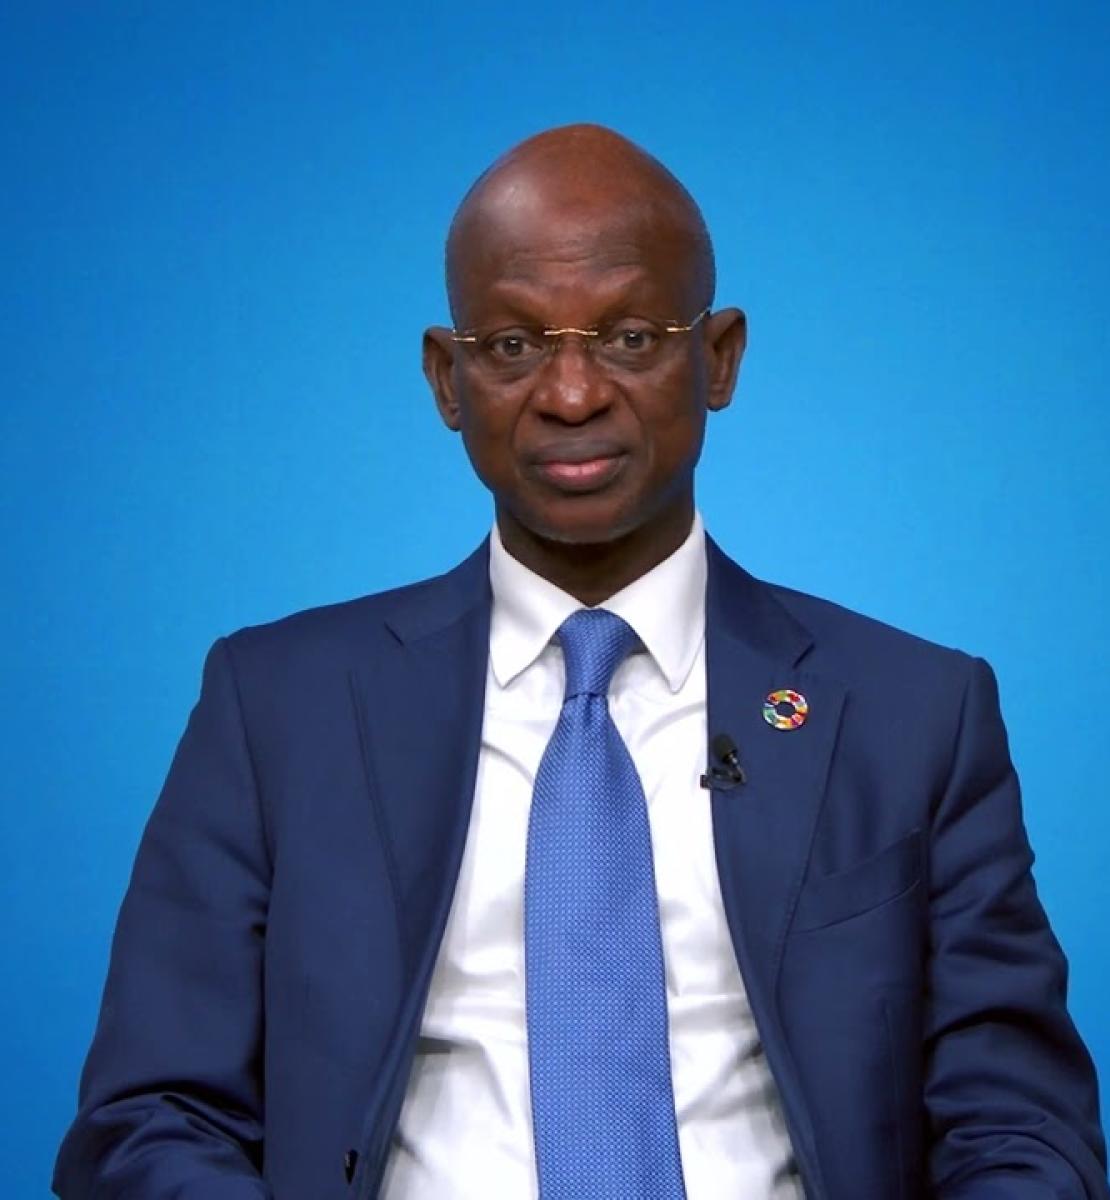 Screenshot from video message shows Resident Coordinator in Senegal, Siaka Coulibaly